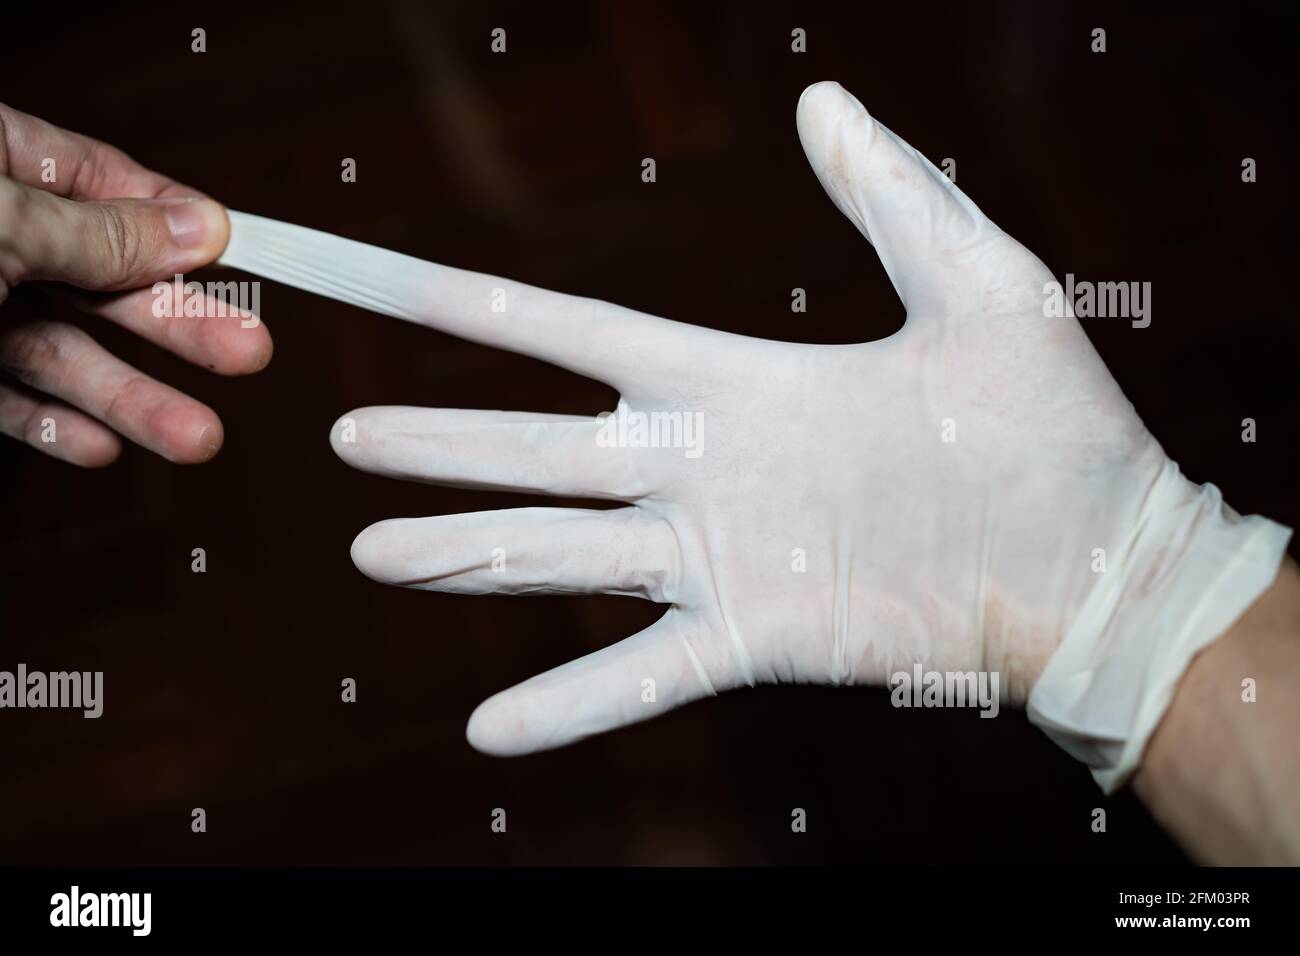 stretching the latex glove on right hand Stock Photo